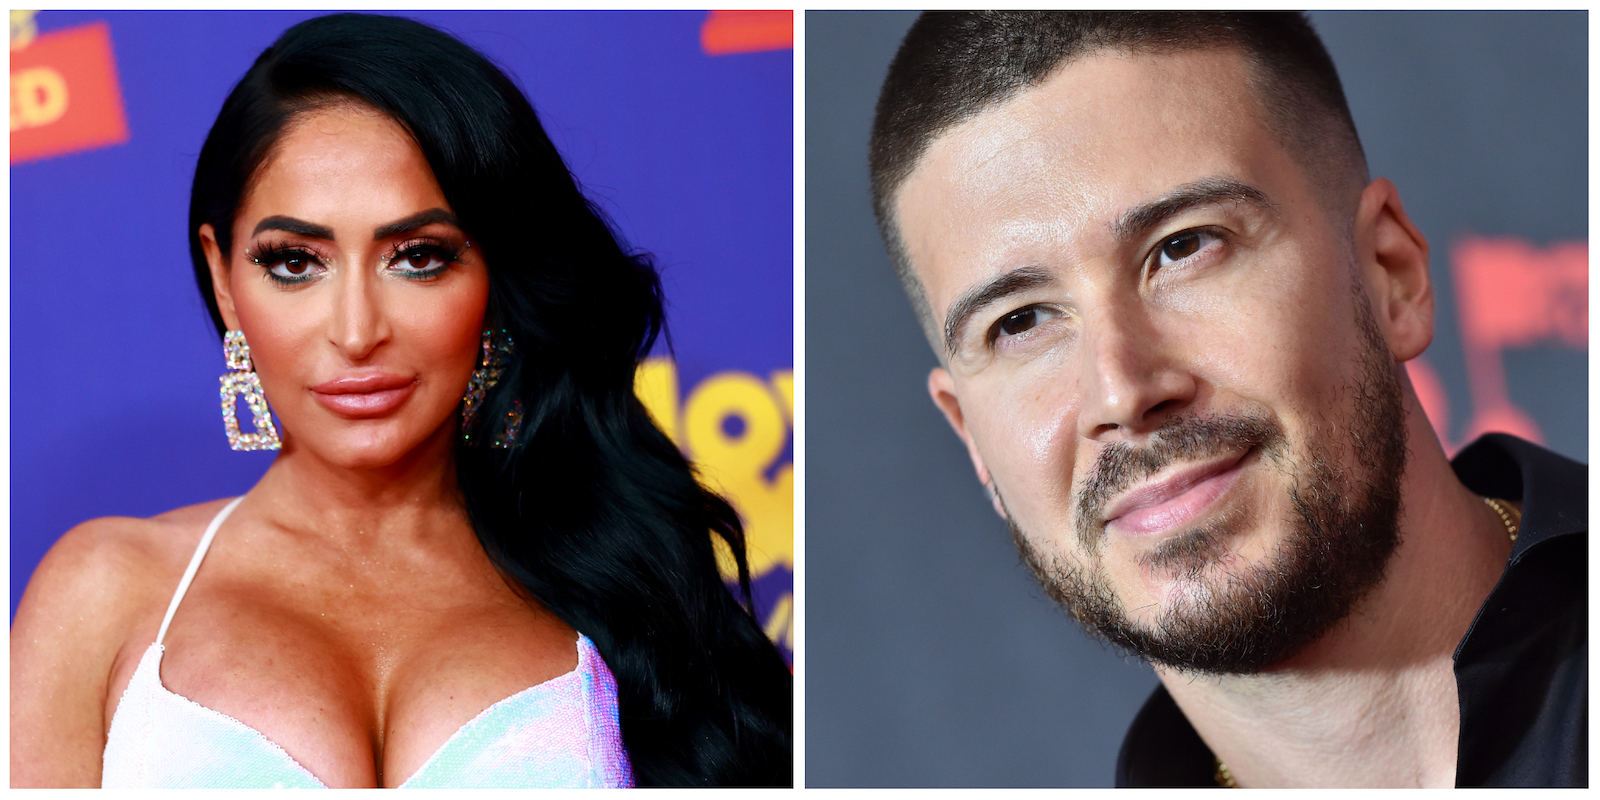 Photos of Angelina Pivarnick and Vinny Guadagnino, who a 'Jersey Shore' production assistant claims hook up behind the scenes